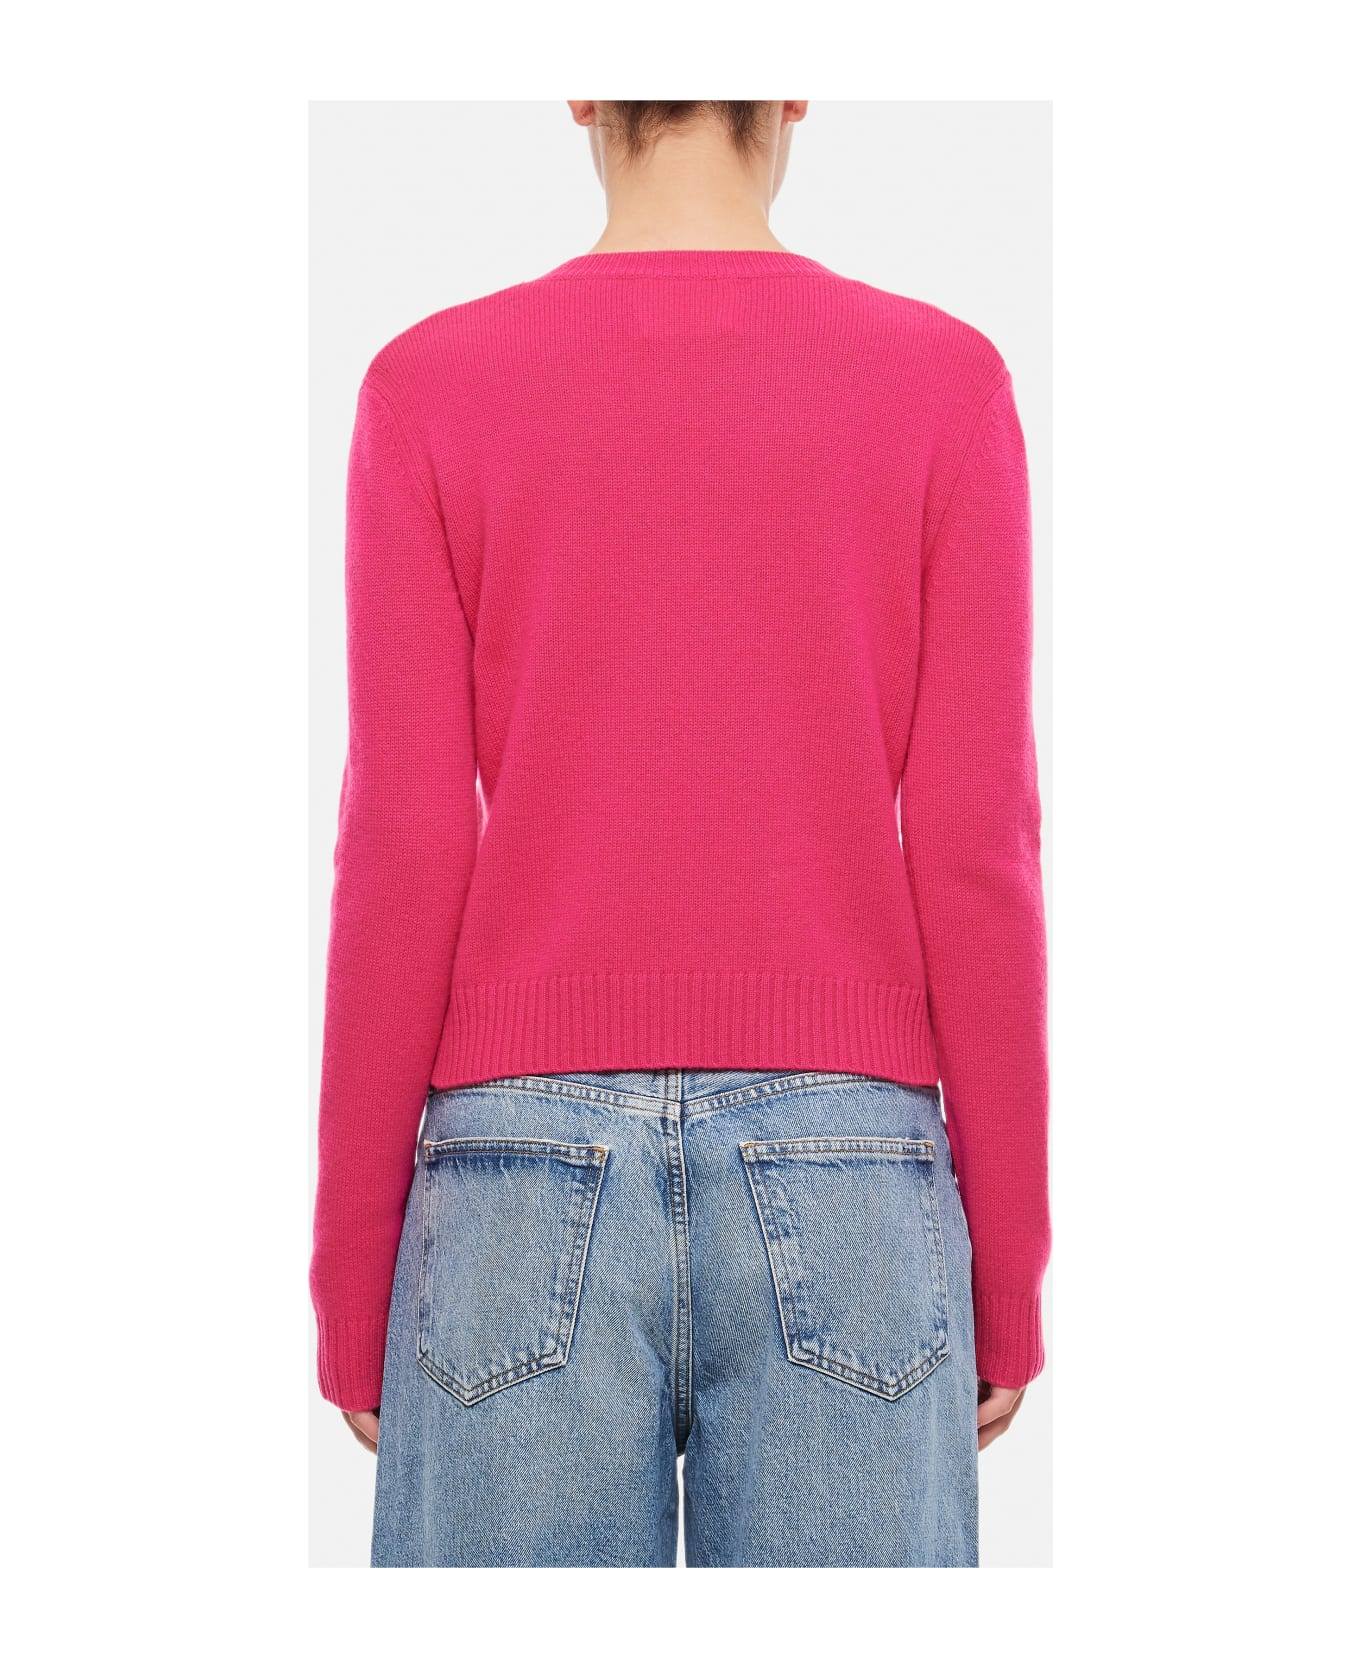 Lisa Yang Mable Cashmere Sweater - Pink